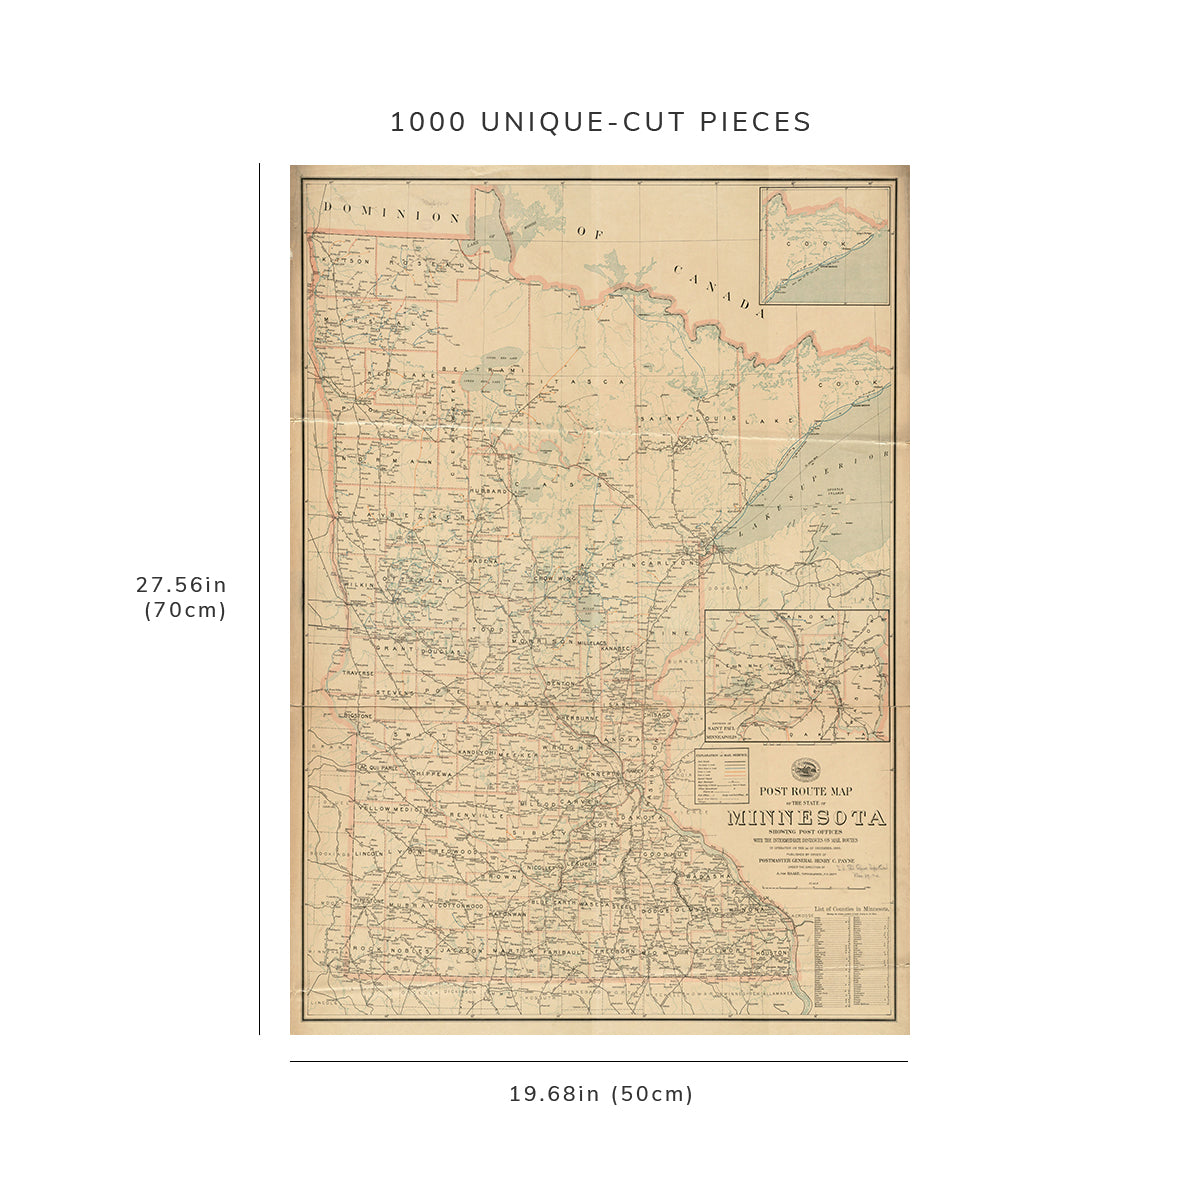 1000 Piece Jigsaw Puzzle: 1903 Map Minnesota Post route of the state of Minnesota